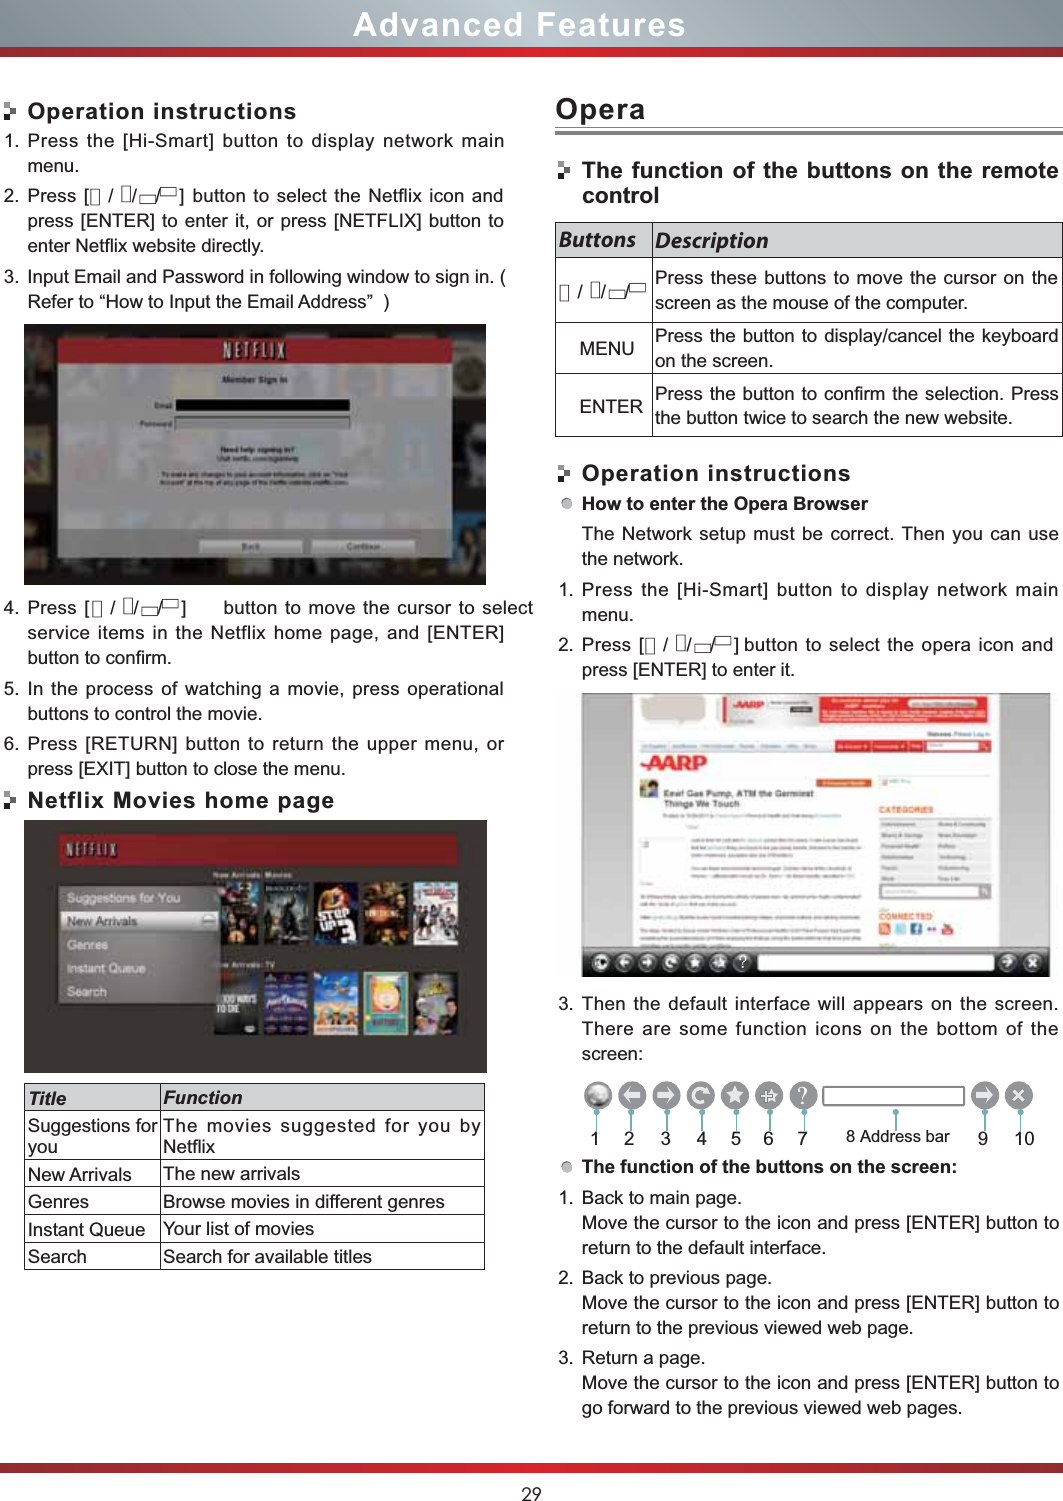 29Advanced FeaturesOperation instructions1. Press the [Hi-Smart] button to display network mainmenu.2. Press [   button to select the Netflix icon andpress [ENTER] to enter it, or press [NETFLIX] button toenter Netflix website directly.3. Input Email and Password in following window to sign in. (Refer to “How to Input the Email Address”  )4. Press [ button to move the cursor to selectservice items in the Netflix home page, and [ENTER]button to confirm.5. In the process of watching a movie, press operationalbuttons to control the movie. 6. Press [RETURN] button to return the upper menu, orpress [EXIT] button to close the menu.Netflix Movies home pageTitle FunctionSuggestions foryouThe movies suggested for you byNetflixNew Arrivals The new arrivalsGenres Browse movies in different genresInstant Queue Your list of moviesSearch Search for available titlesOperaThe function of the buttons on the remotecontrolOperation instructionsHow to enter the Opera BrowserThe Network setup must be correct. Then you can usethe network.1. Press the [Hi-Smart] button to display network mainmenu.2. Press [                  button to select the opera icon andpress [ENTER] to enter it.3. Then the default interface will appears on the screen.There are some function icons on the bottom of thescreen:The function of the buttons on the screen:1. Back to main page.Move the cursor to the icon and press [ENTER] button toreturn to the default interface.2. Back to previous page.Move the cursor to the icon and press [ENTER] button toreturn to the previous viewed web page.3. Return a page.Move the cursor to the icon and press [ENTER] button togo forward to the previous viewed web pages.Buttons DescriptionPress these buttons to move the cursor on thescreen as the mouse of the computer.    MENU Press the button to display/cancel the keyboardon the screen.    ENTER Press the button to confirm the selection. Pressthe button twice to search the new website.213456 91078 Address bar▲/▲/▲/▲]▲/▲/▲/▲▲/▲/▲/▲]▲/▲/▲/▲]&quot;?